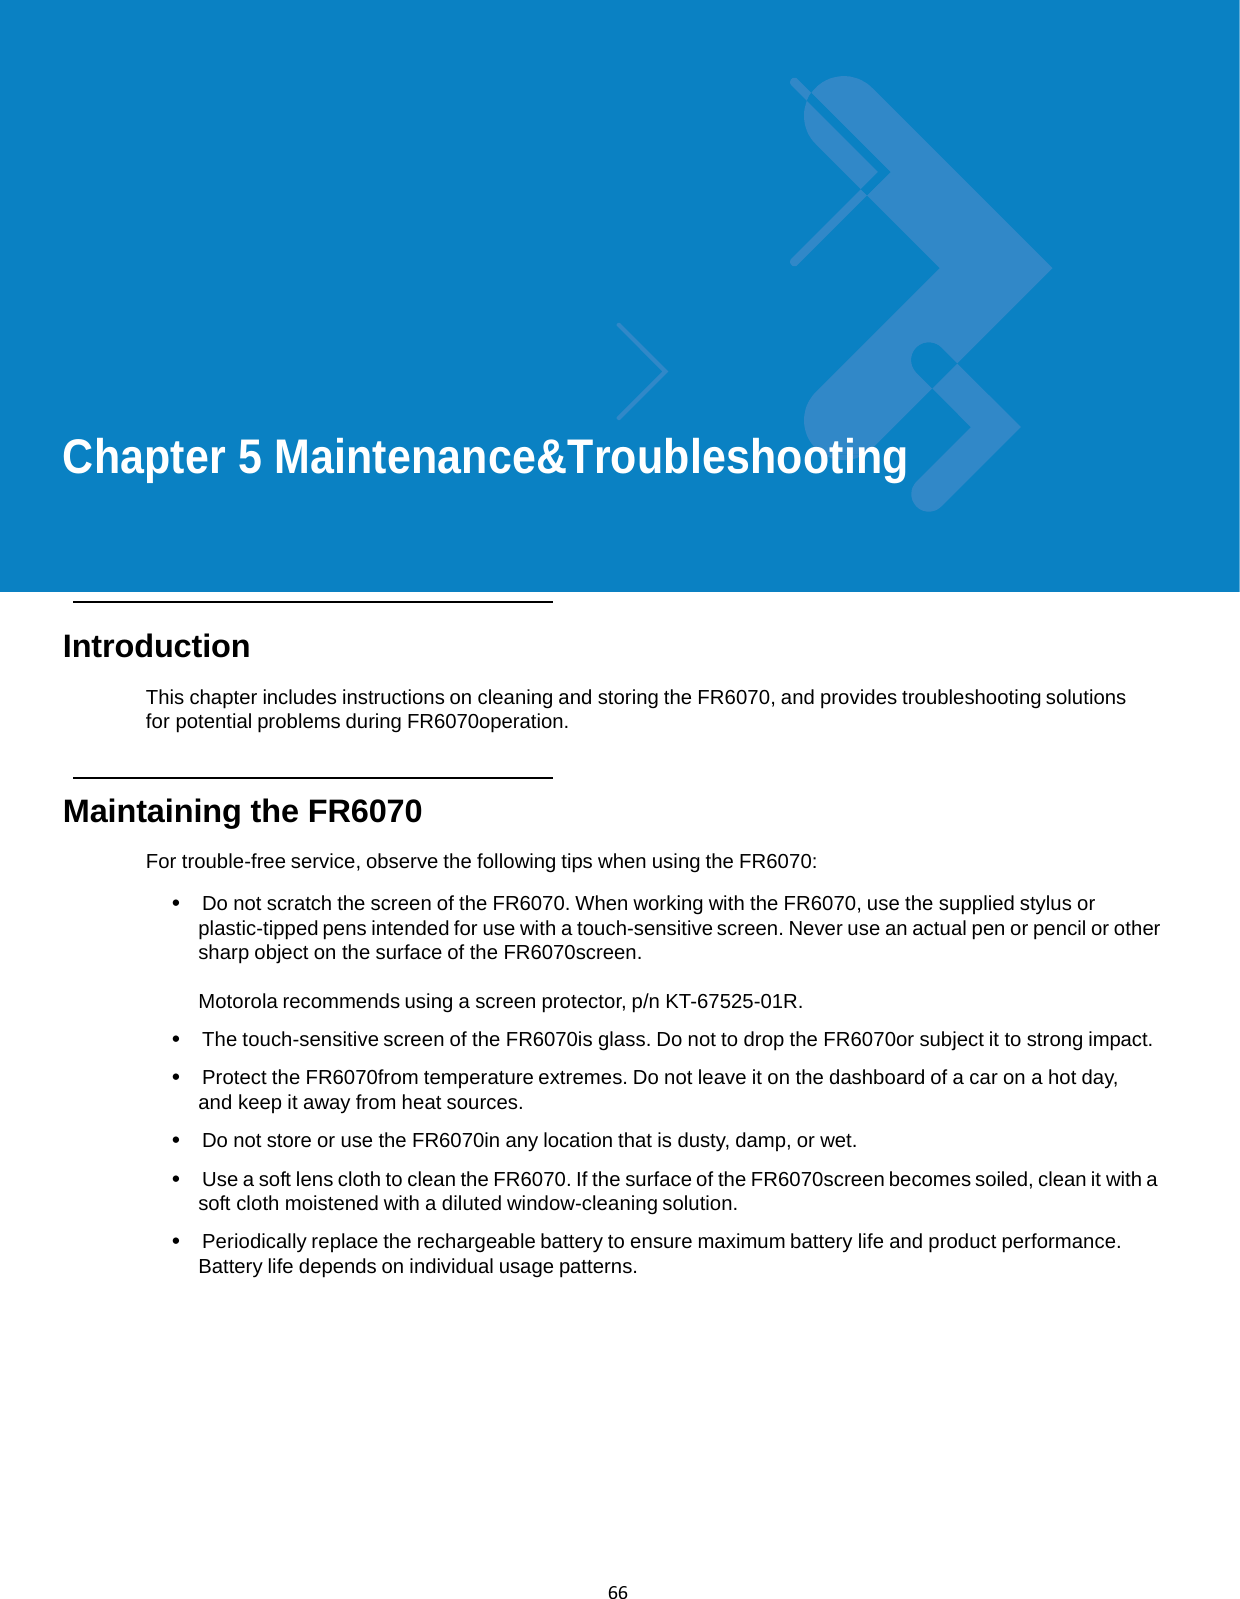  66             Chapter 5 Maintenance&amp;Troubleshooting       Introduction  This chapter includes instructions on cleaning and storing the FR6070, and provides troubleshooting solutions for potential problems during FR6070operation.    Maintaining the FR6070  For trouble-free service, observe the following tips when using the FR6070:  •  Do not scratch the screen of the FR6070. When working with the FR6070, use the supplied stylus or plastic-tipped pens intended for use with a touch-sensitive screen. Never use an actual pen or pencil or other sharp object on the surface of the FR6070screen.  Motorola recommends using a screen protector, p/n KT-67525-01R.  •  The touch-sensitive screen of the FR6070is glass. Do not to drop the FR6070or subject it to strong impact.  •  Protect the FR6070from temperature extremes. Do not leave it on the dashboard of a car on a hot day, and keep it away from heat sources.  •  Do not store or use the FR6070in any location that is dusty, damp, or wet.  •  Use a soft lens cloth to clean the FR6070. If the surface of the FR6070screen becomes soiled, clean it with a soft cloth moistened with a diluted window-cleaning solution.  •  Periodically replace the rechargeable battery to ensure maximum battery life and product performance. Battery life depends on individual usage patterns. 